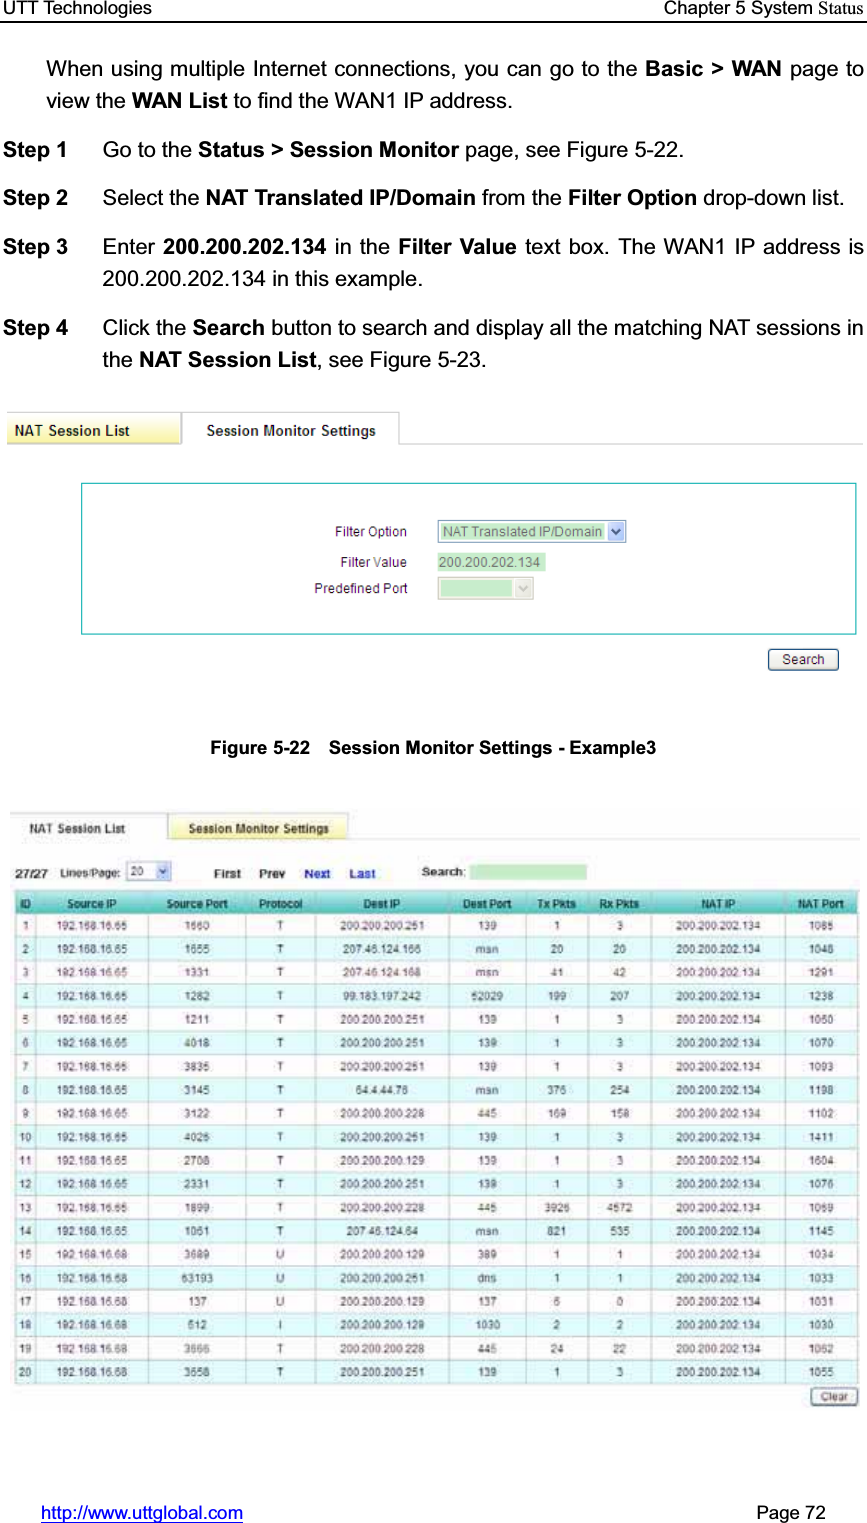 UTT Technologies    Chapter 5 System Statushttp://www.uttglobal.com                                                       Page 72 When using multiple Internet connections, you can go to the Basic &gt; WAN page to view the WAN List to find the WAN1 IP address.   Step 1  Go to the Status &gt; Session Monitor page, see Figure 5-22. Step 2  Select the NAT Translated IP/Domain from the Filter Option drop-down list. Step 3  Enter 200.200.202.134 in the Filter Value text box. The WAN1 IP address is 200.200.202.134 in this example. Step 4  Click the Search button to search and display all the matching NAT sessions in the NAT Session List, see Figure 5-23. Figure 5-22    Session Monitor Settings - Example3 